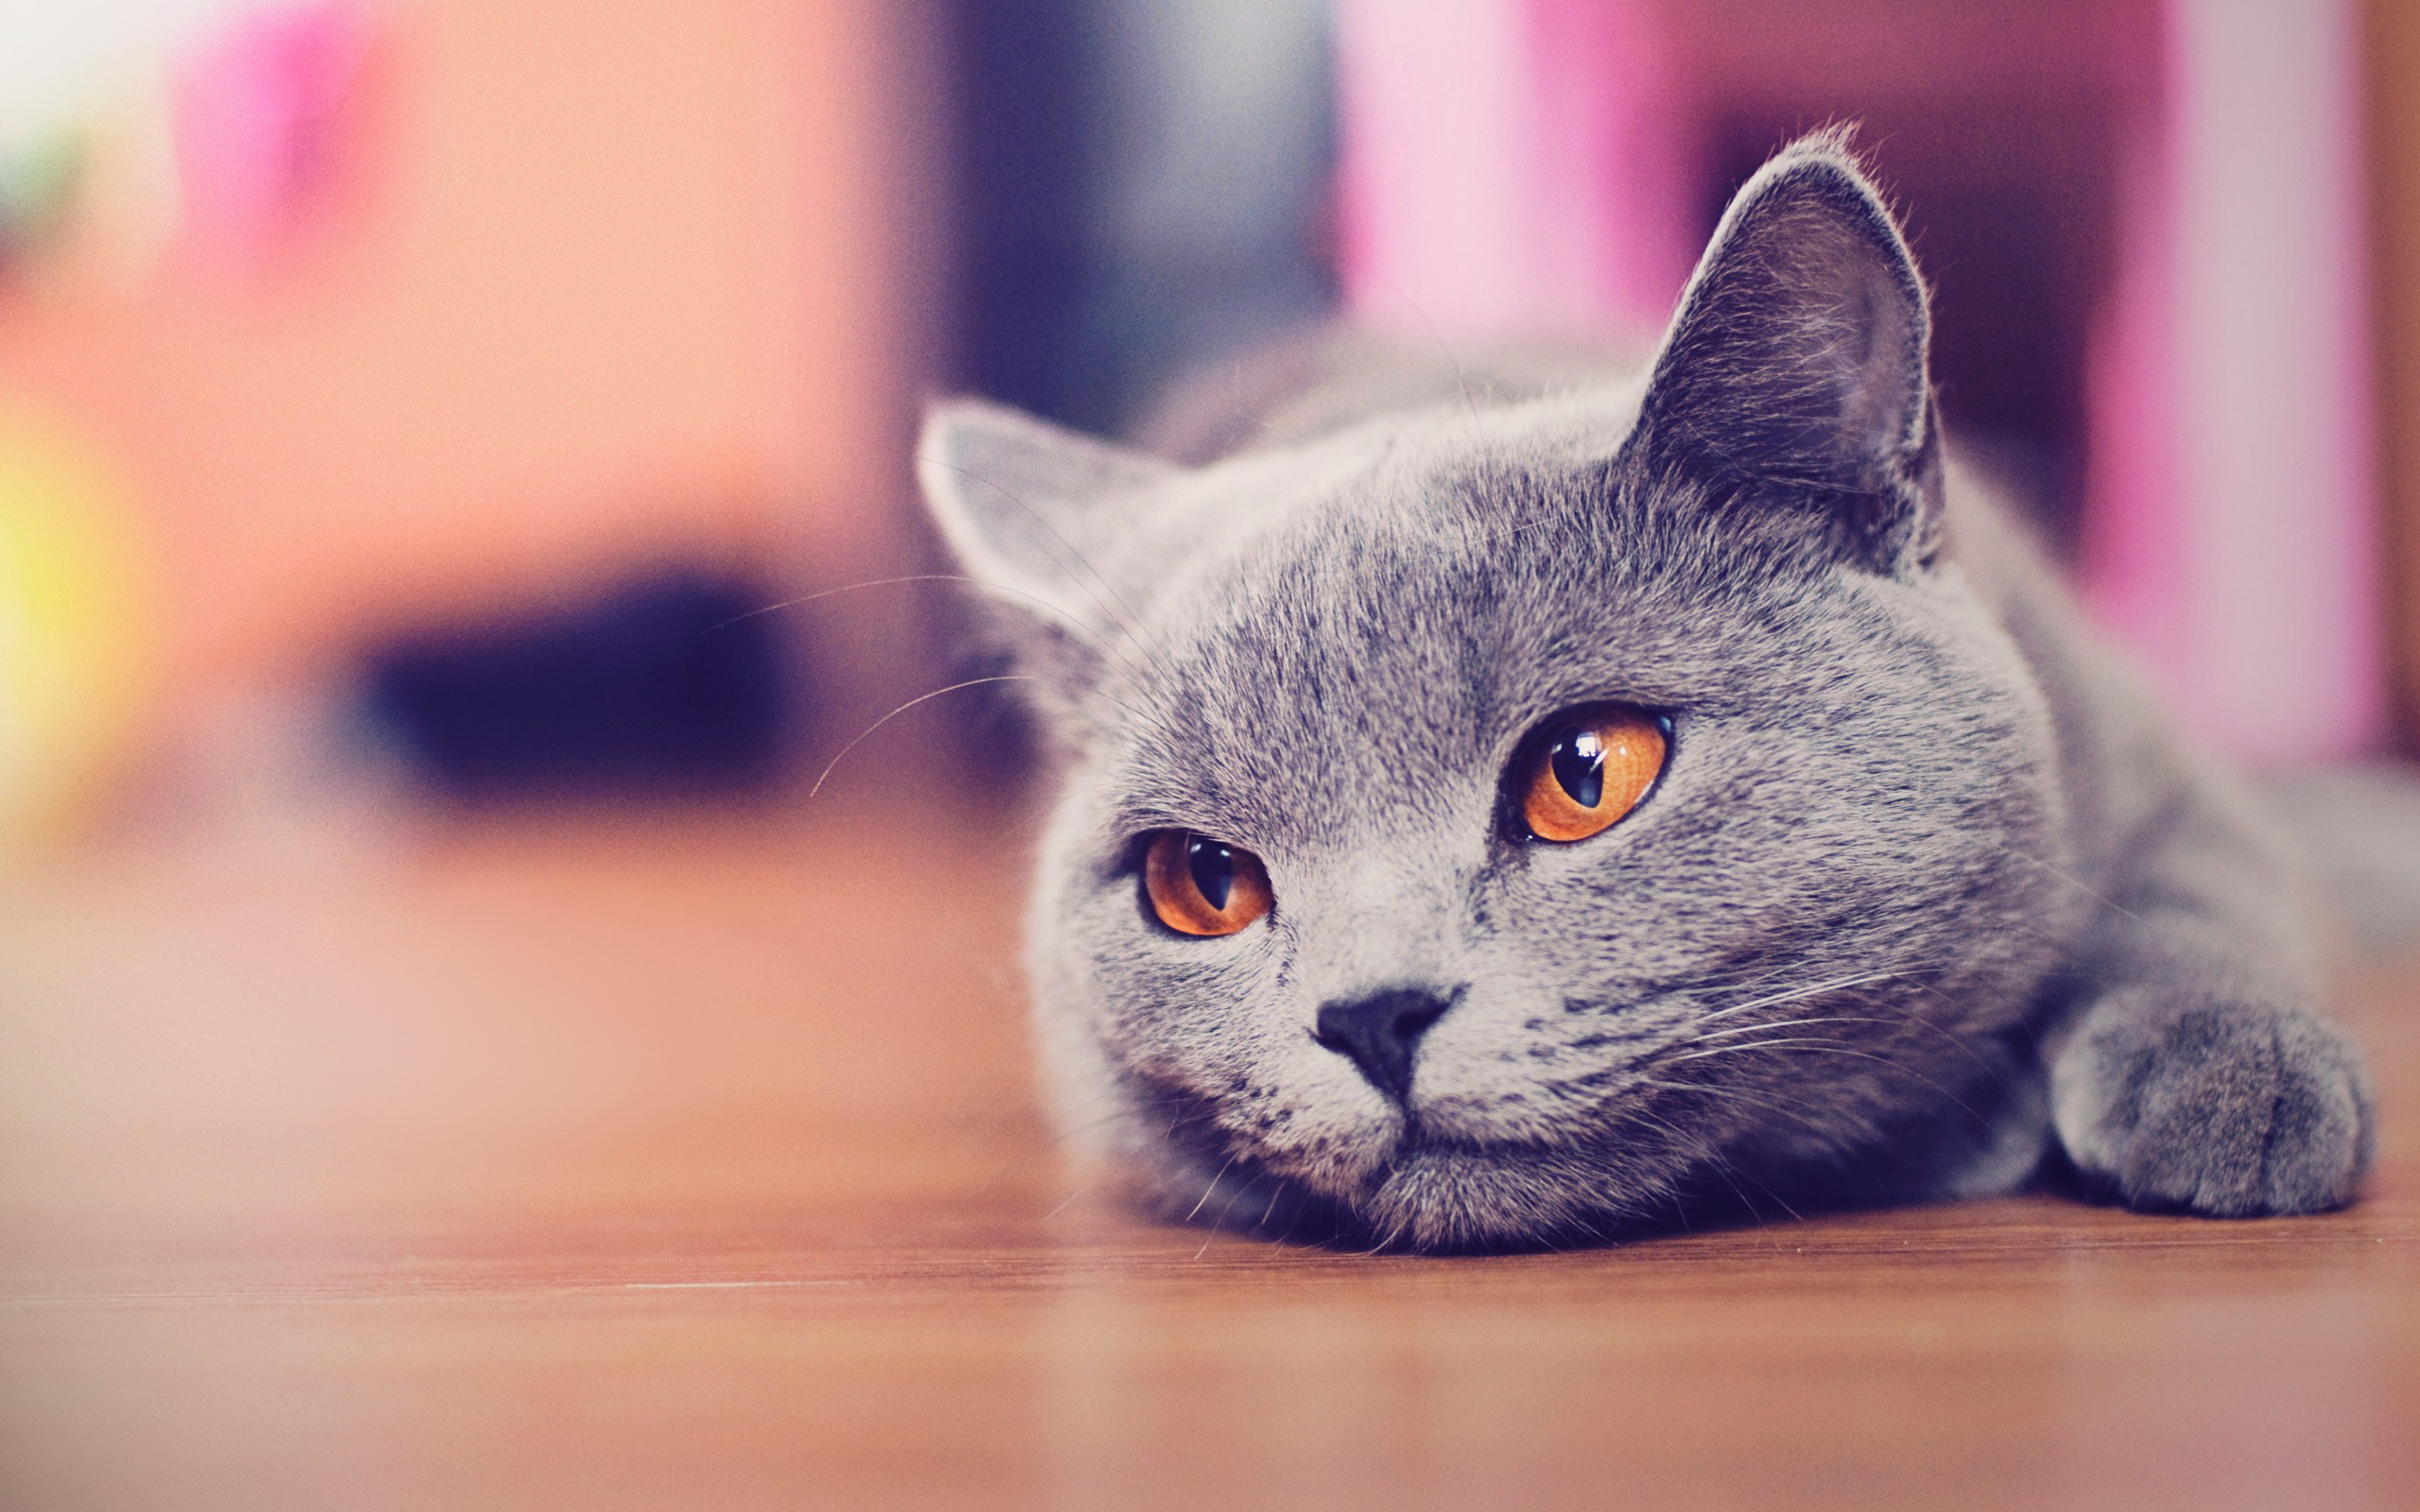 Cat wallpaper ·① Download free stunning backgrounds for desktop and mobile devices in any